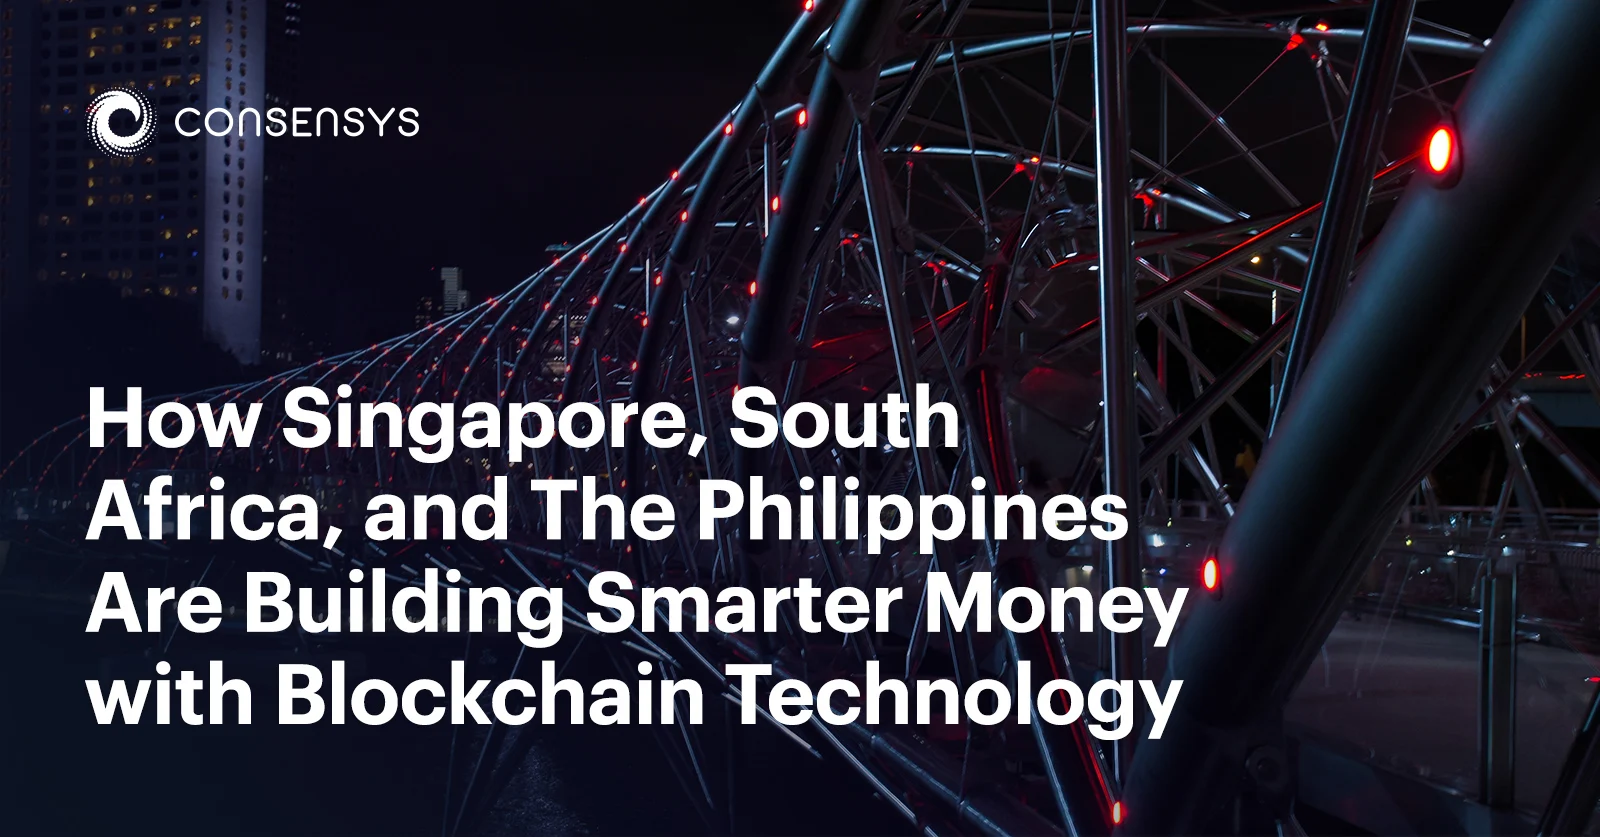 Image: Singapore, South Africa, and Philippines Are Building Smarter Money